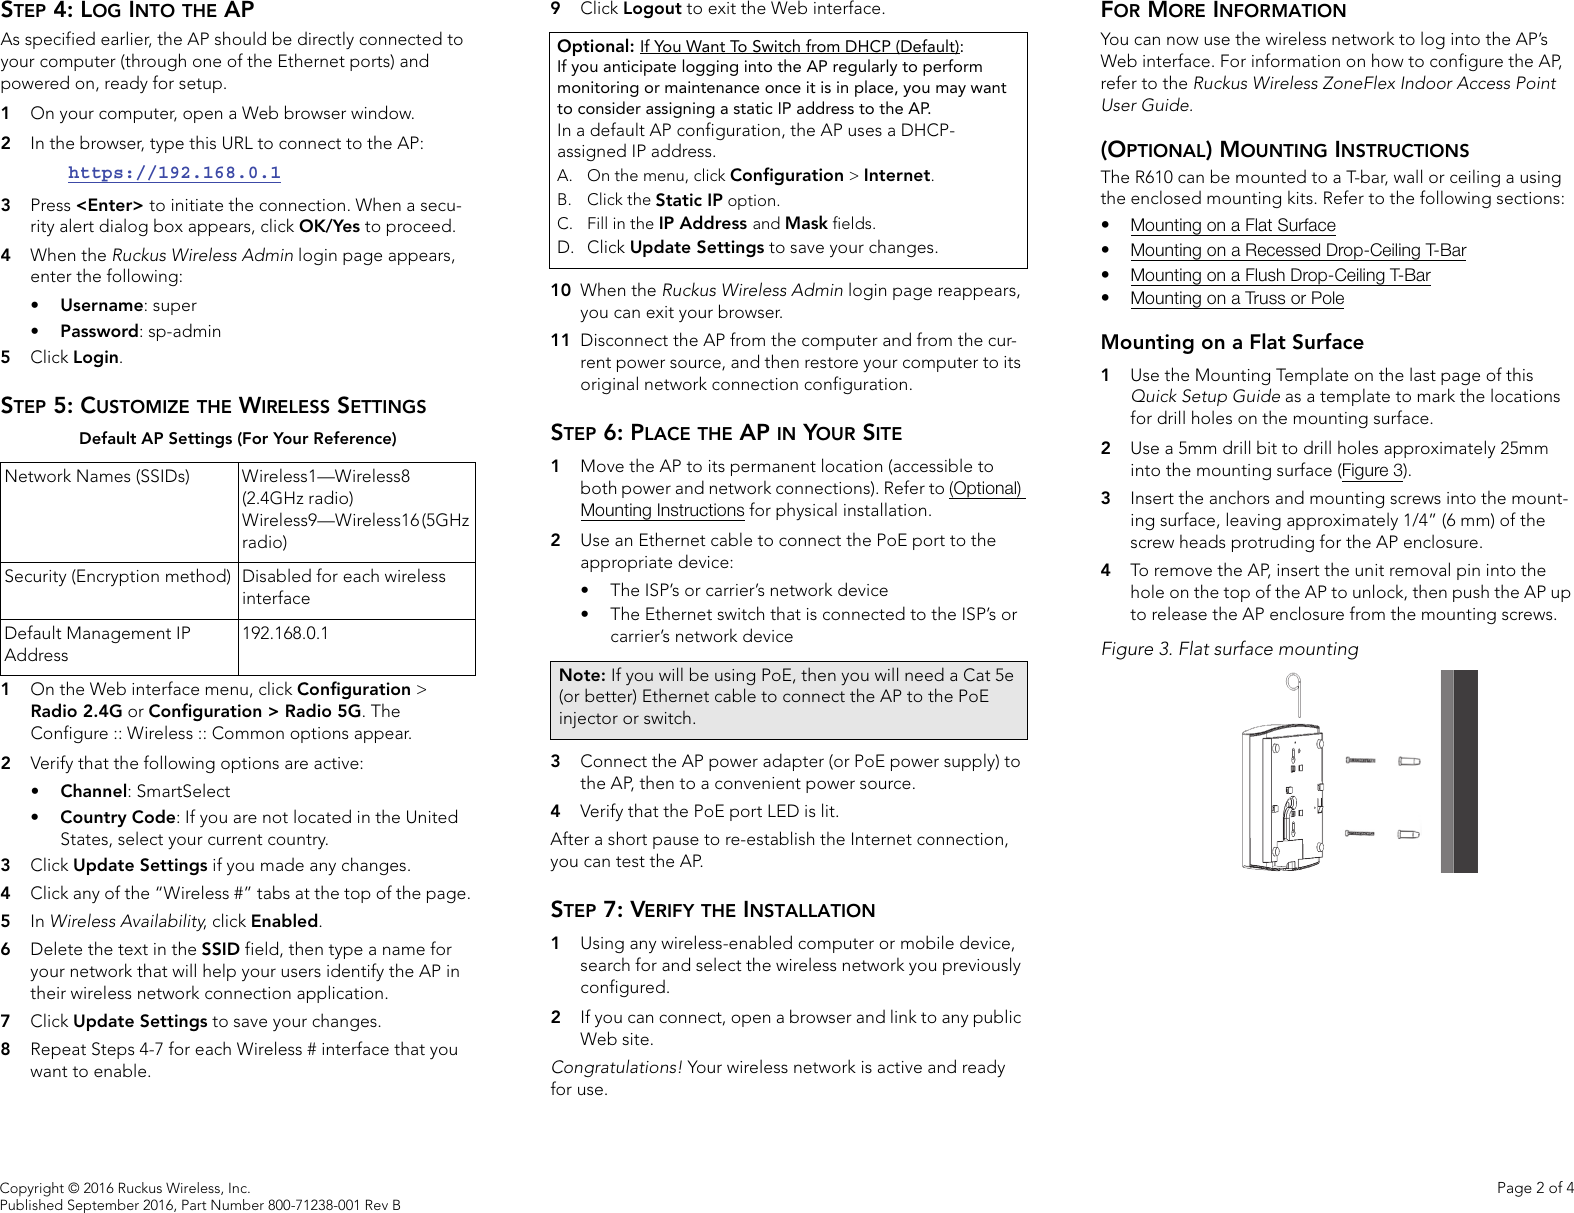 Page 2 of 4 - Ruckus R500 Quick Setup Guide R610 (QSG) R610-QSG